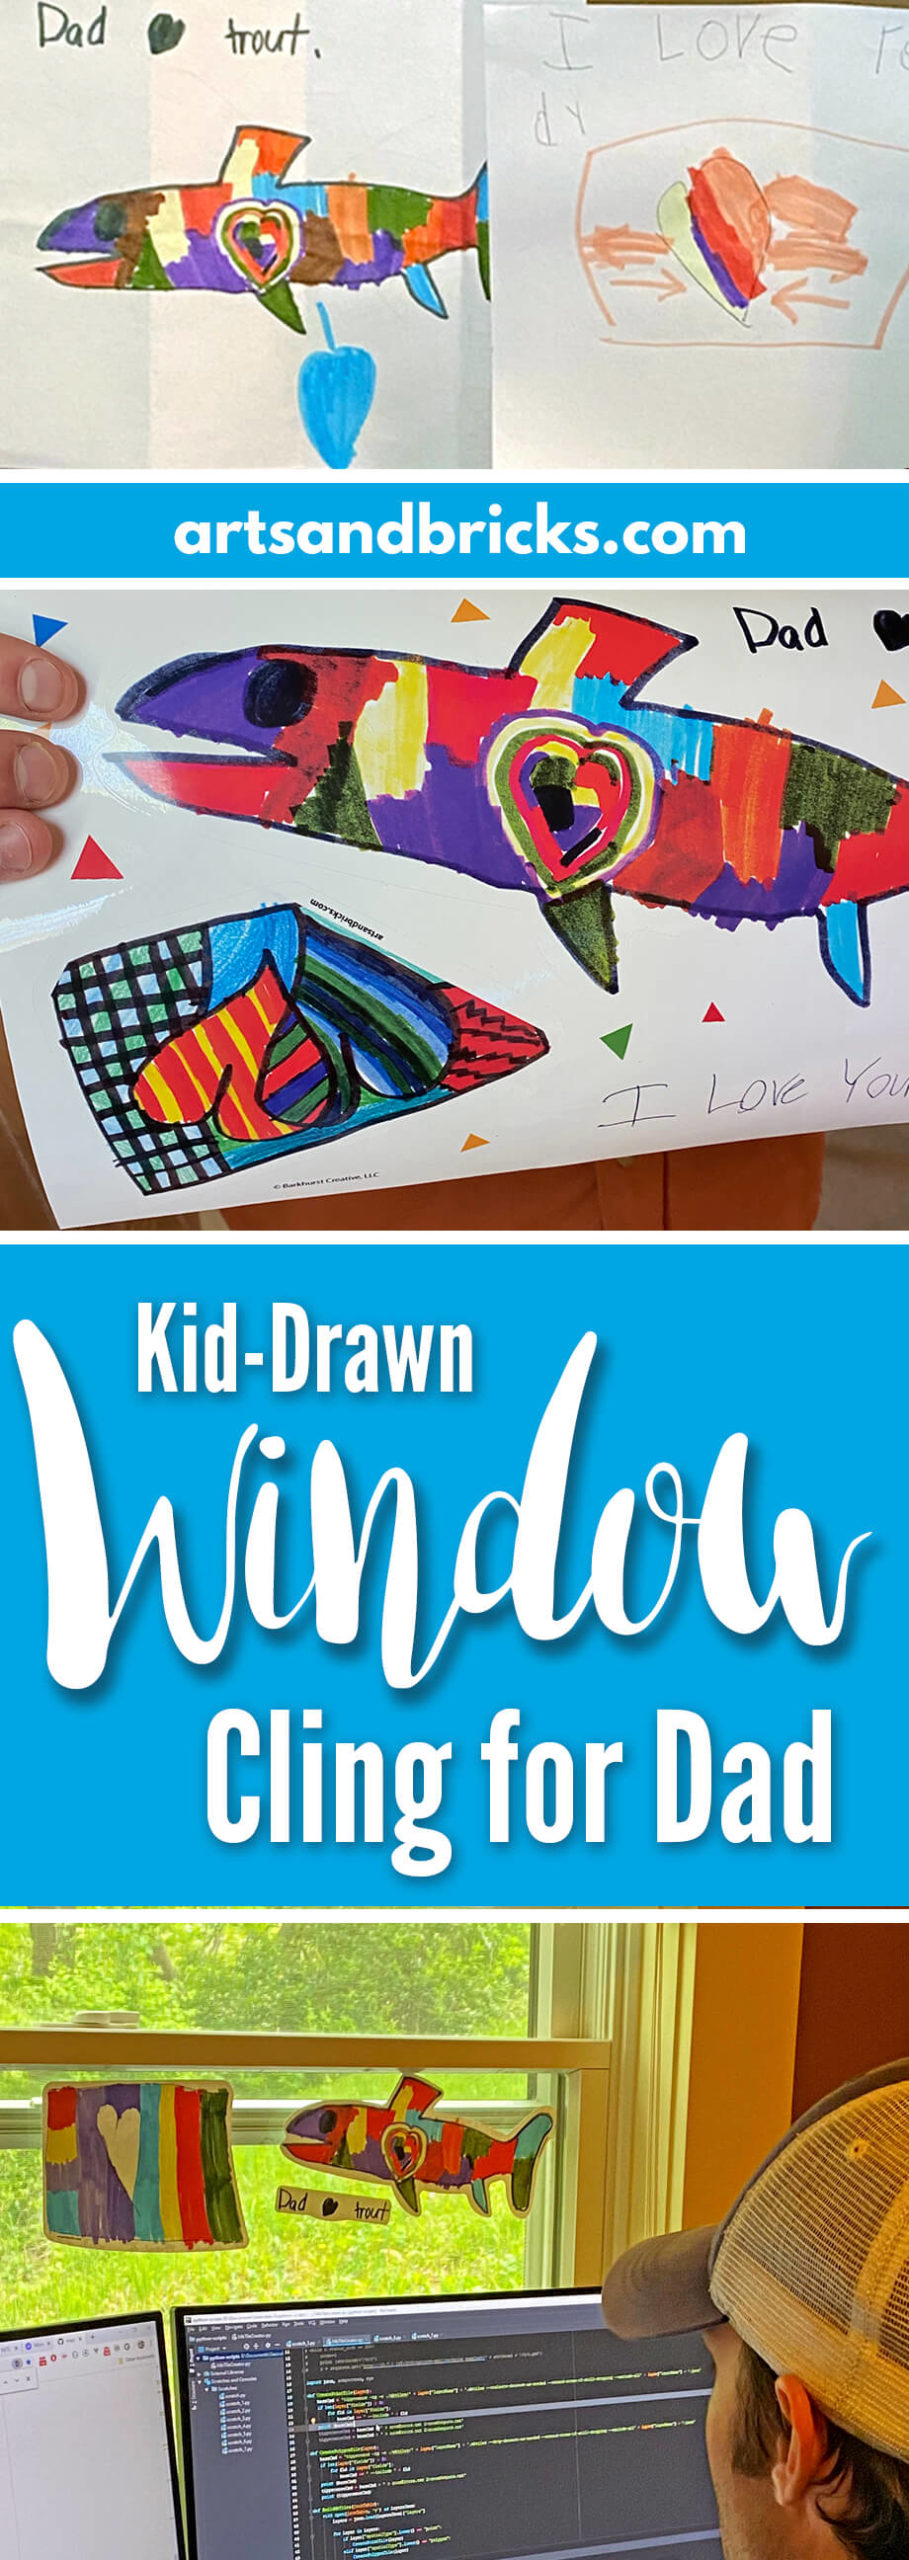 Looking for a unique gift for Dad? Turn your child's drawn images into window decals - perfect for windows and mirrors at the office or at home! #gift #fordad #fromkids #fathersday #kidsart